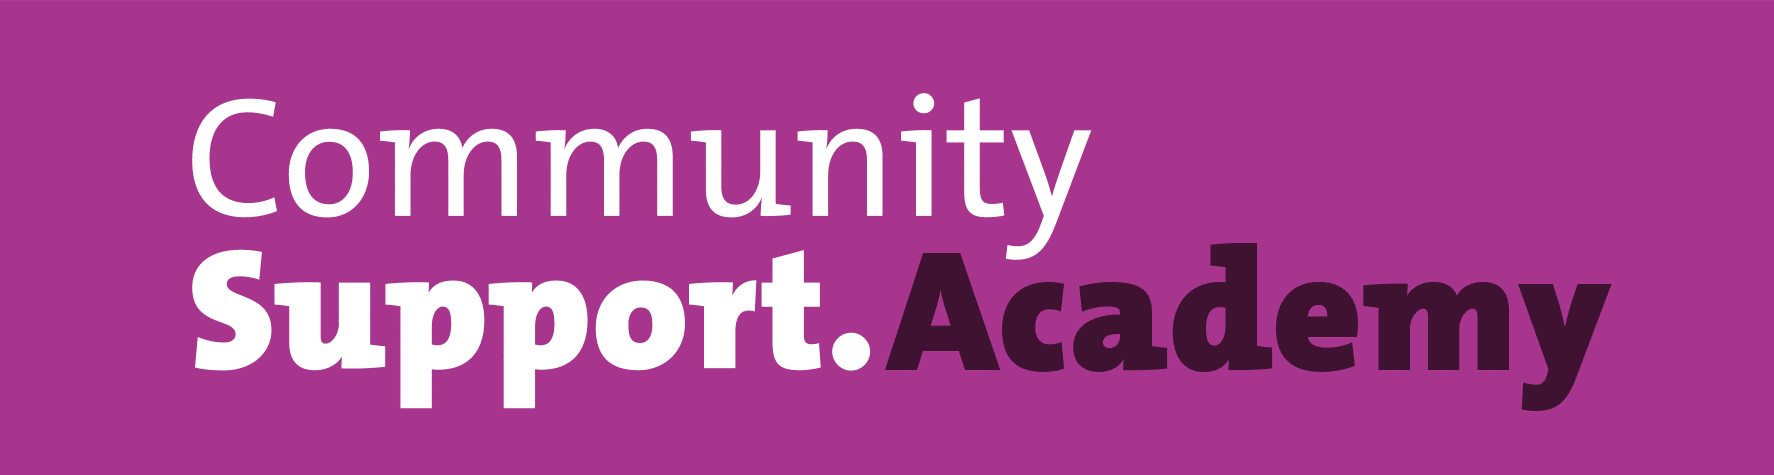 Community Support Academy